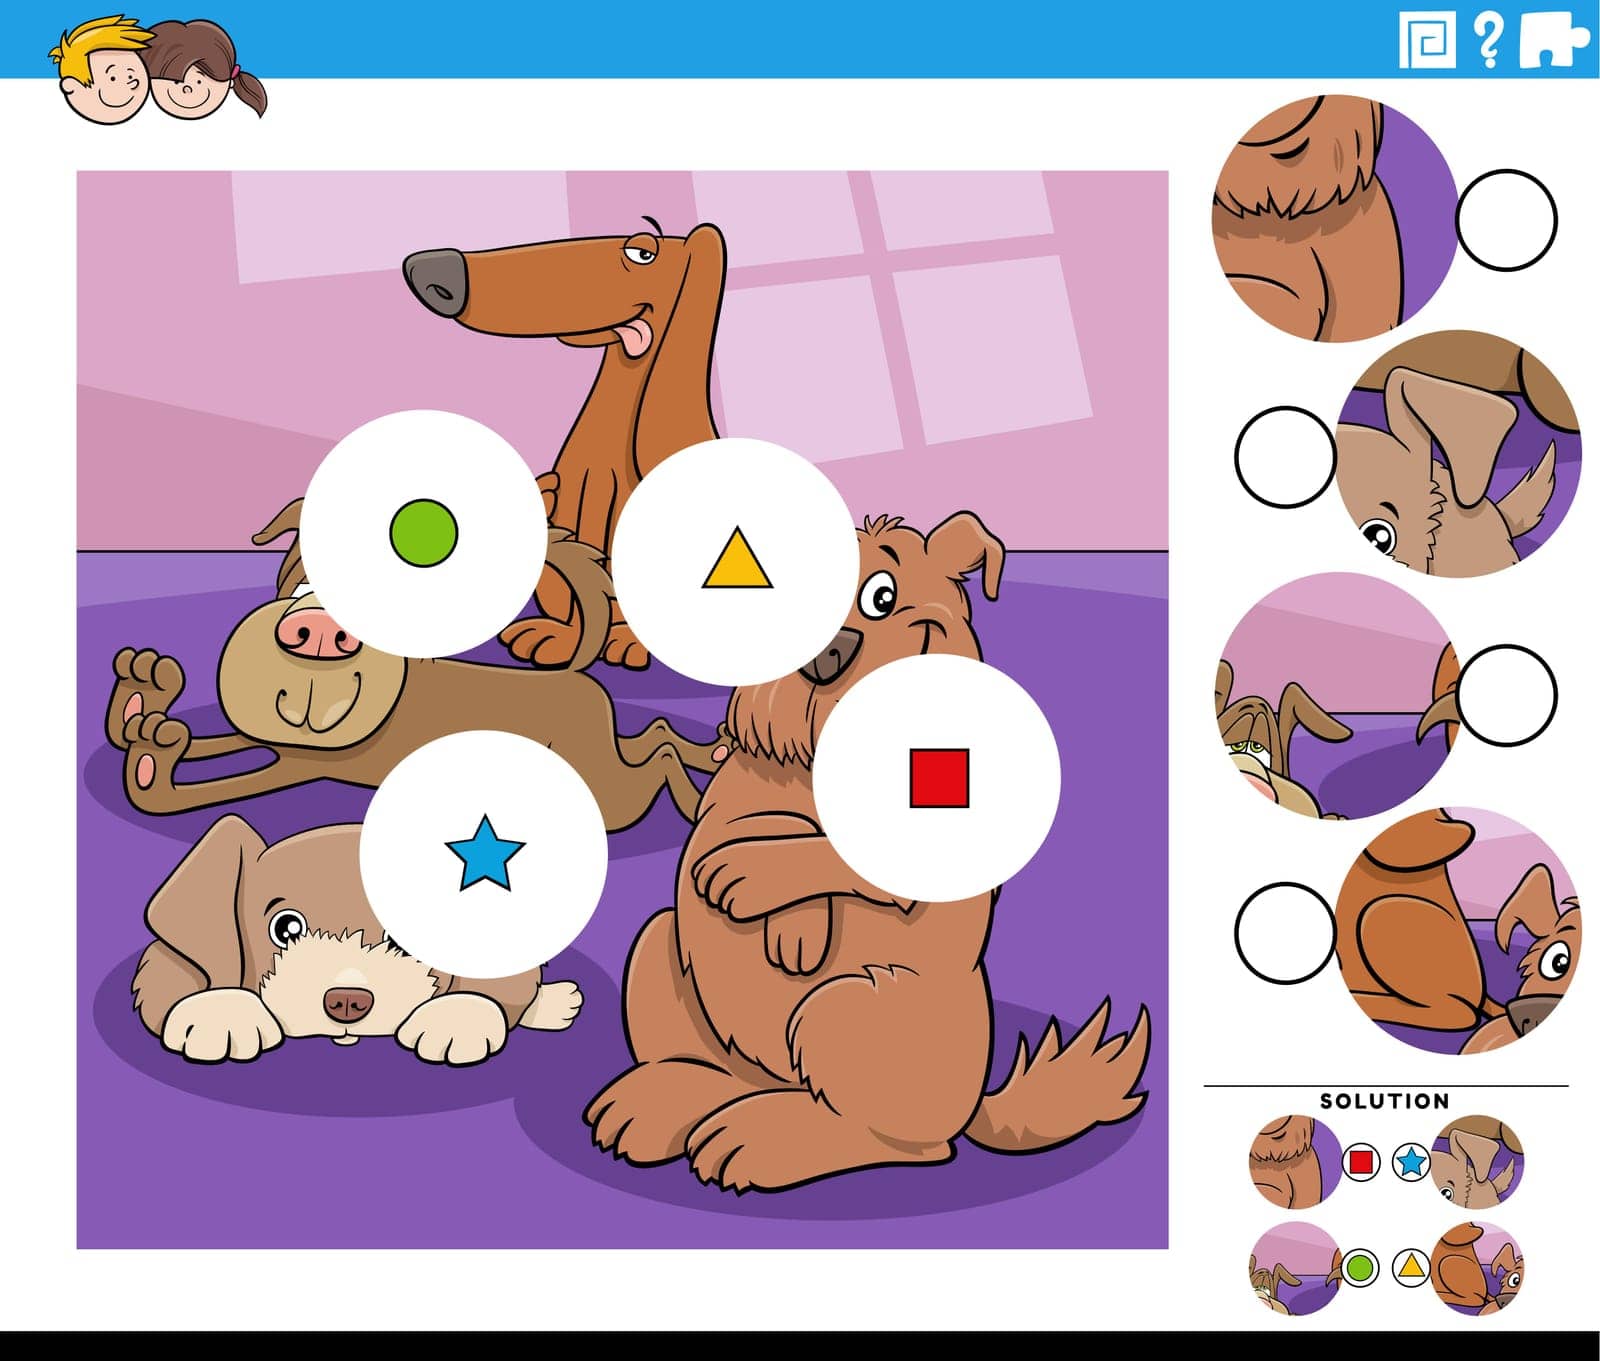 match pieces game with cartoon dogs animal characters by izakowski